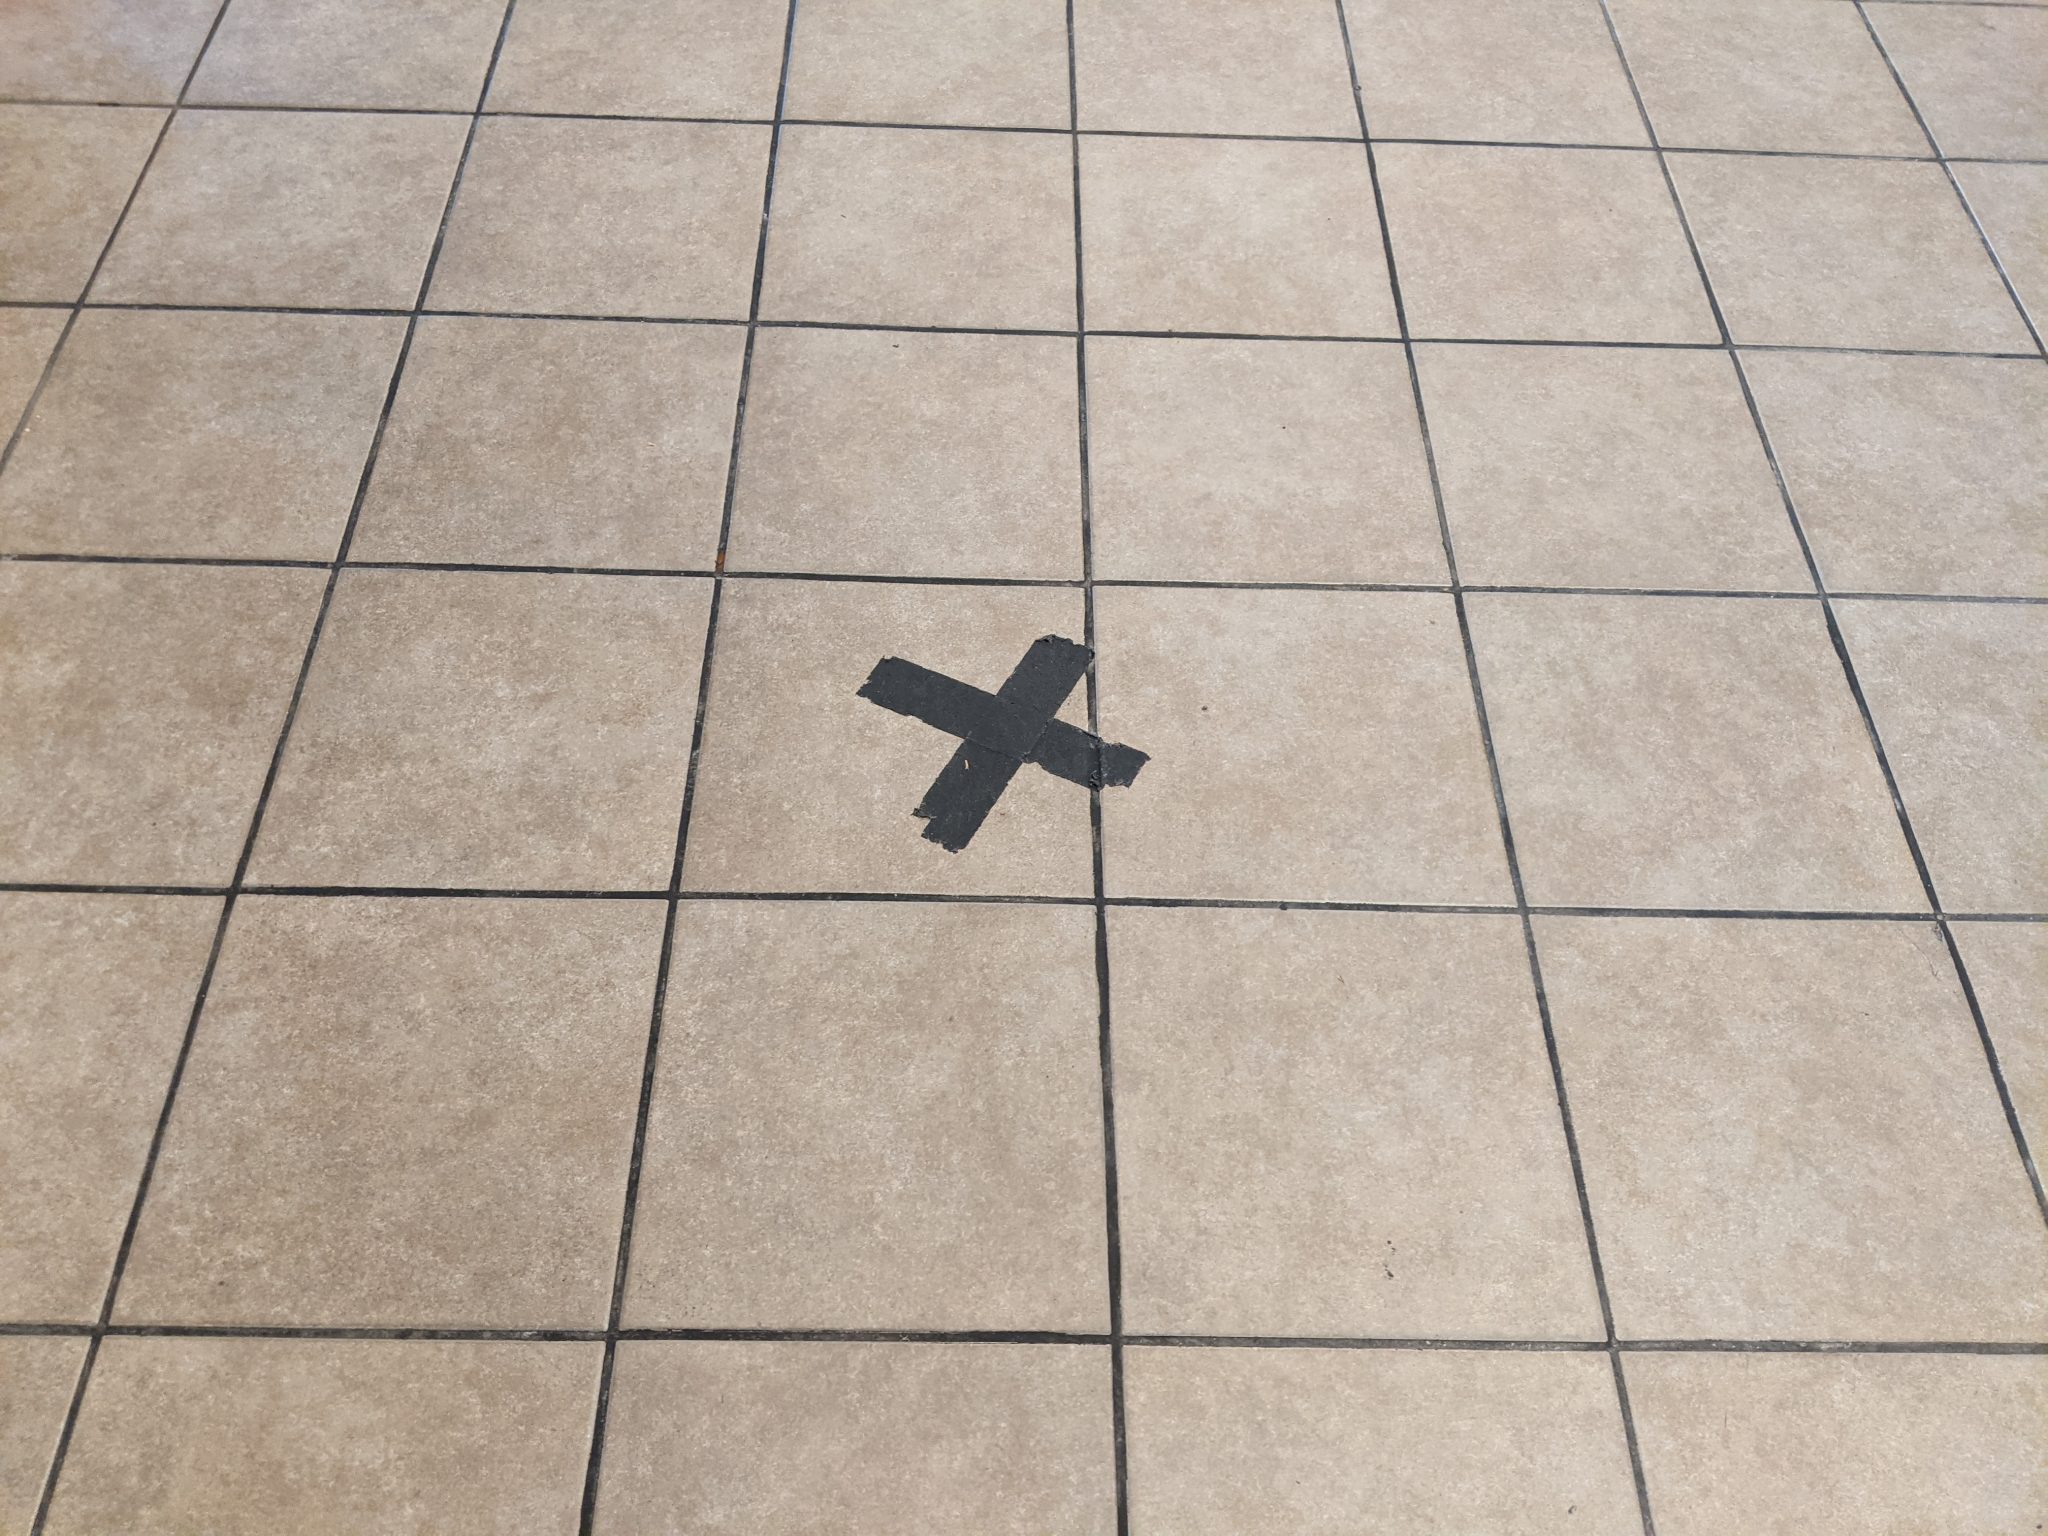 Black tape making an X on the floor to help with social distancing